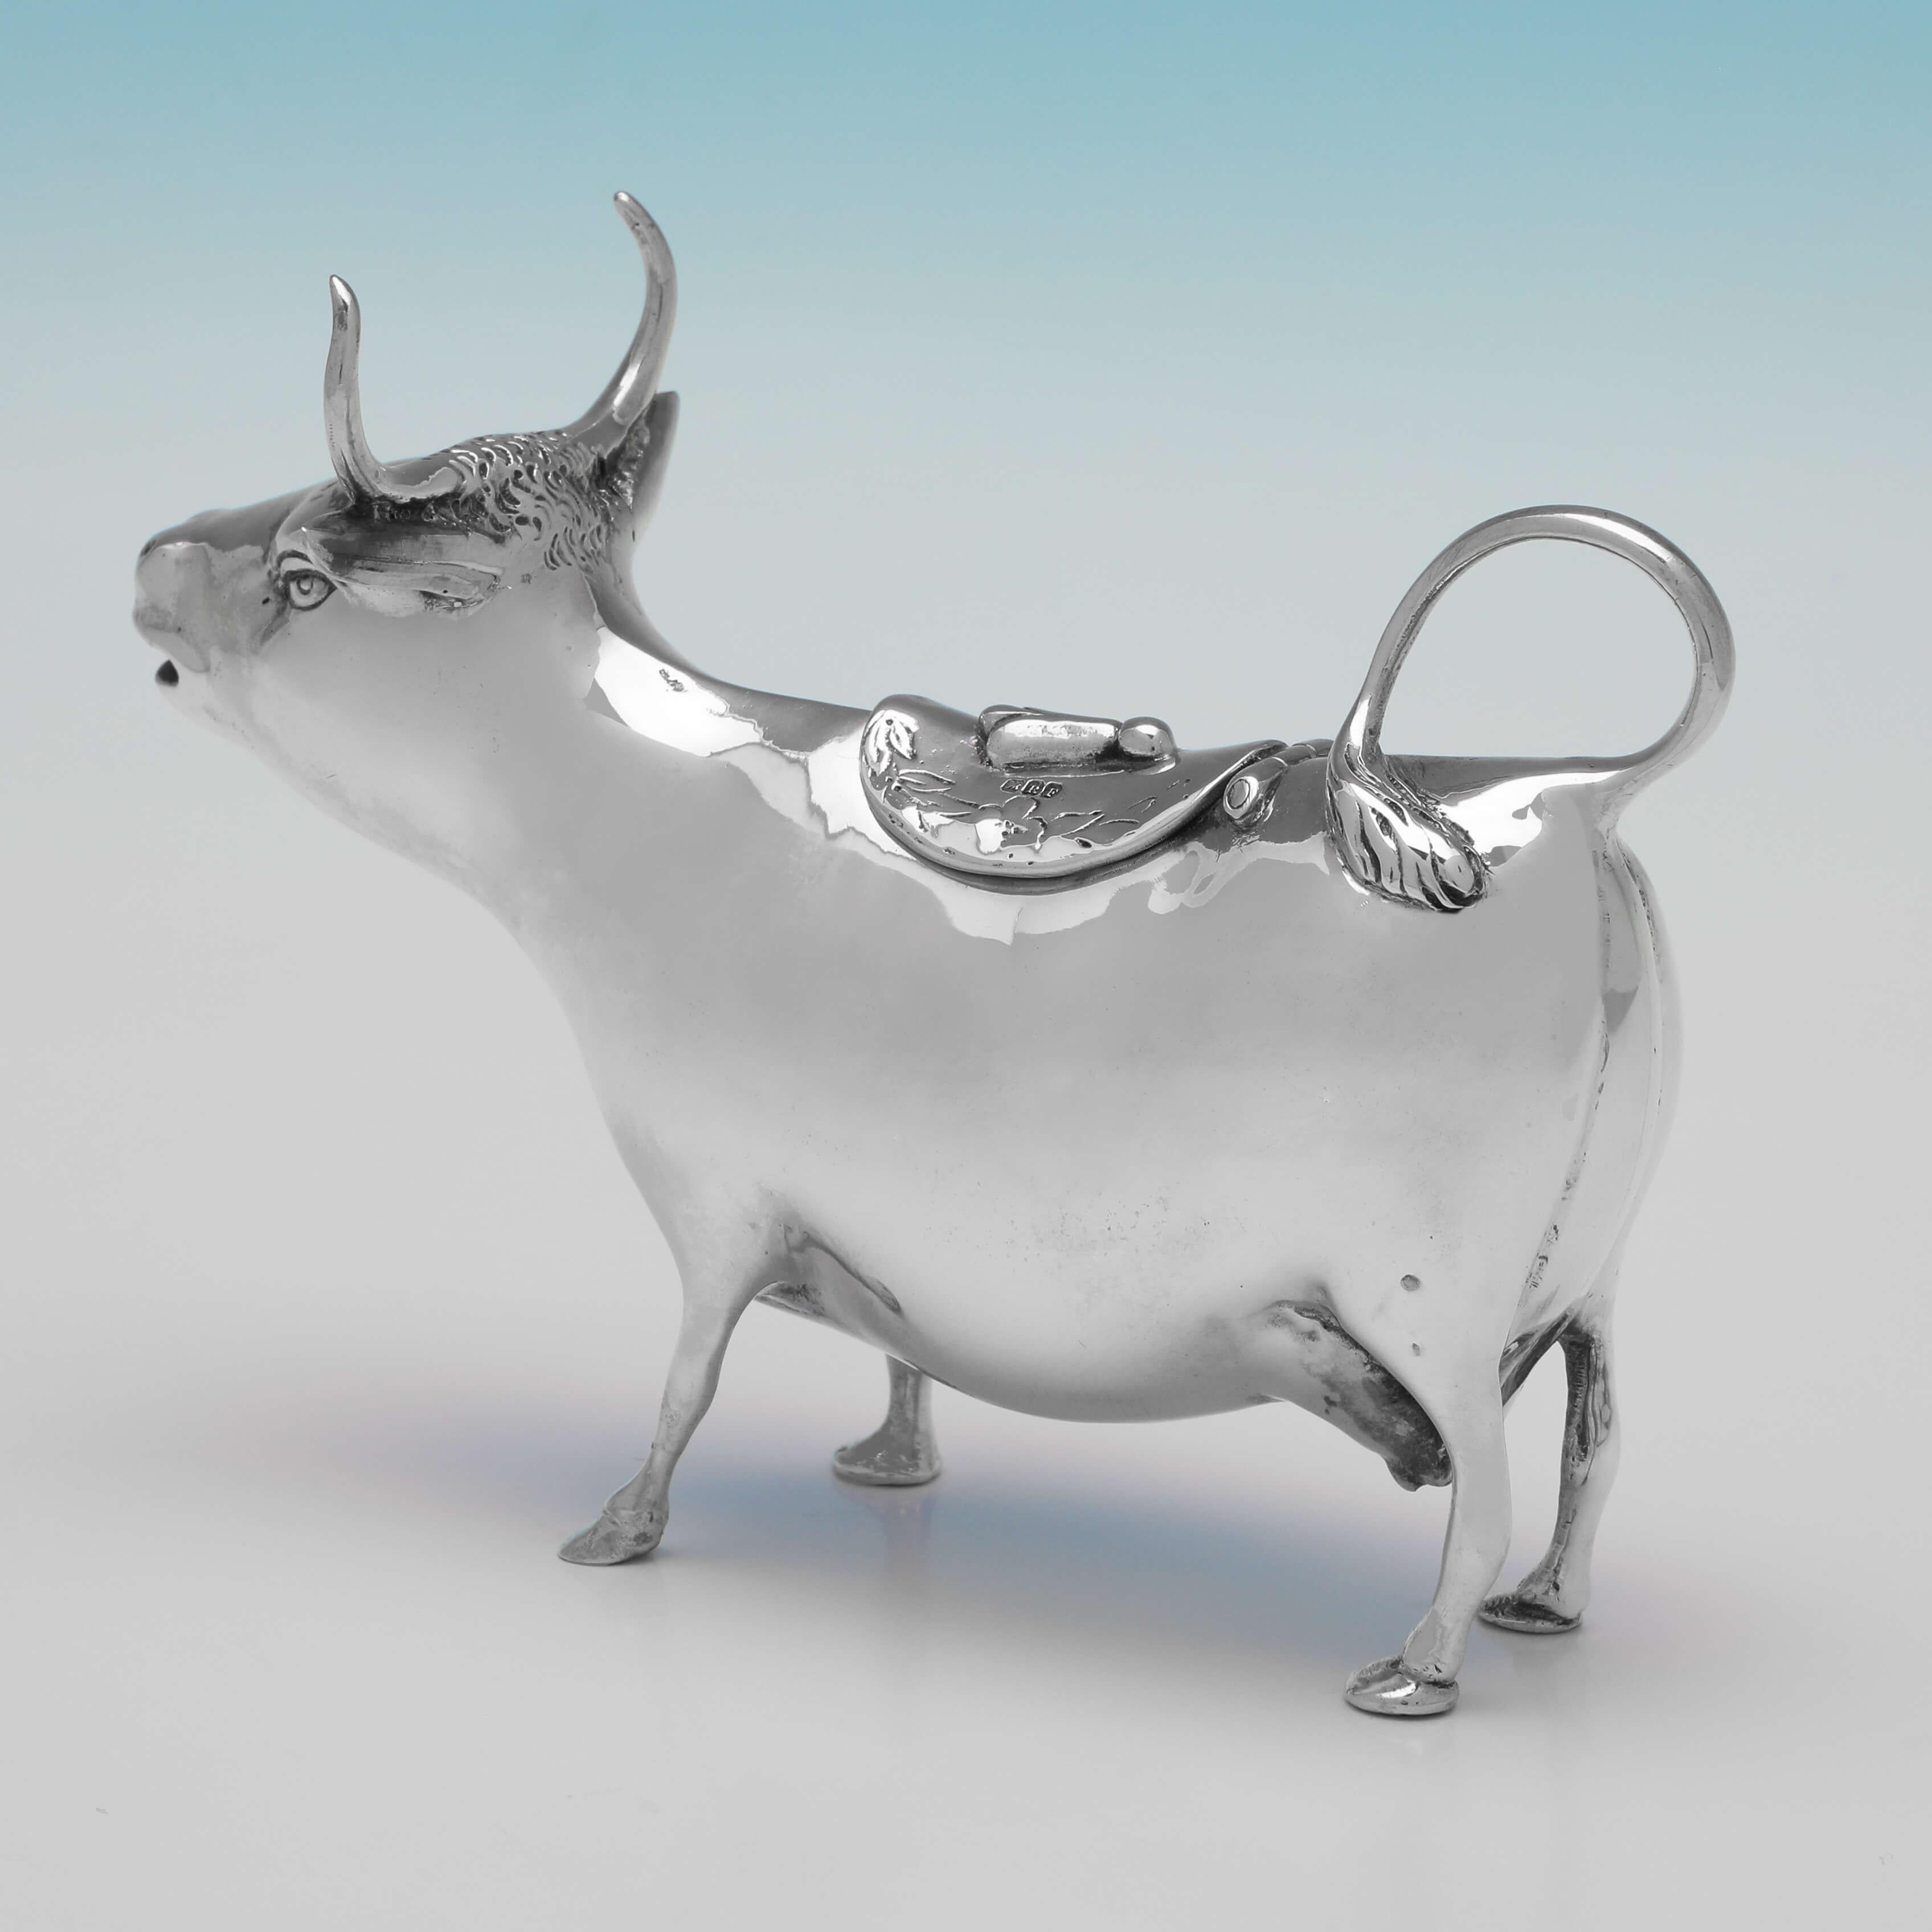 Carrying import marks for Chester in 1900 by Berthold Muller, this handsome, Victorian, Antique Sterling Silver Cow Creamer, measures 4